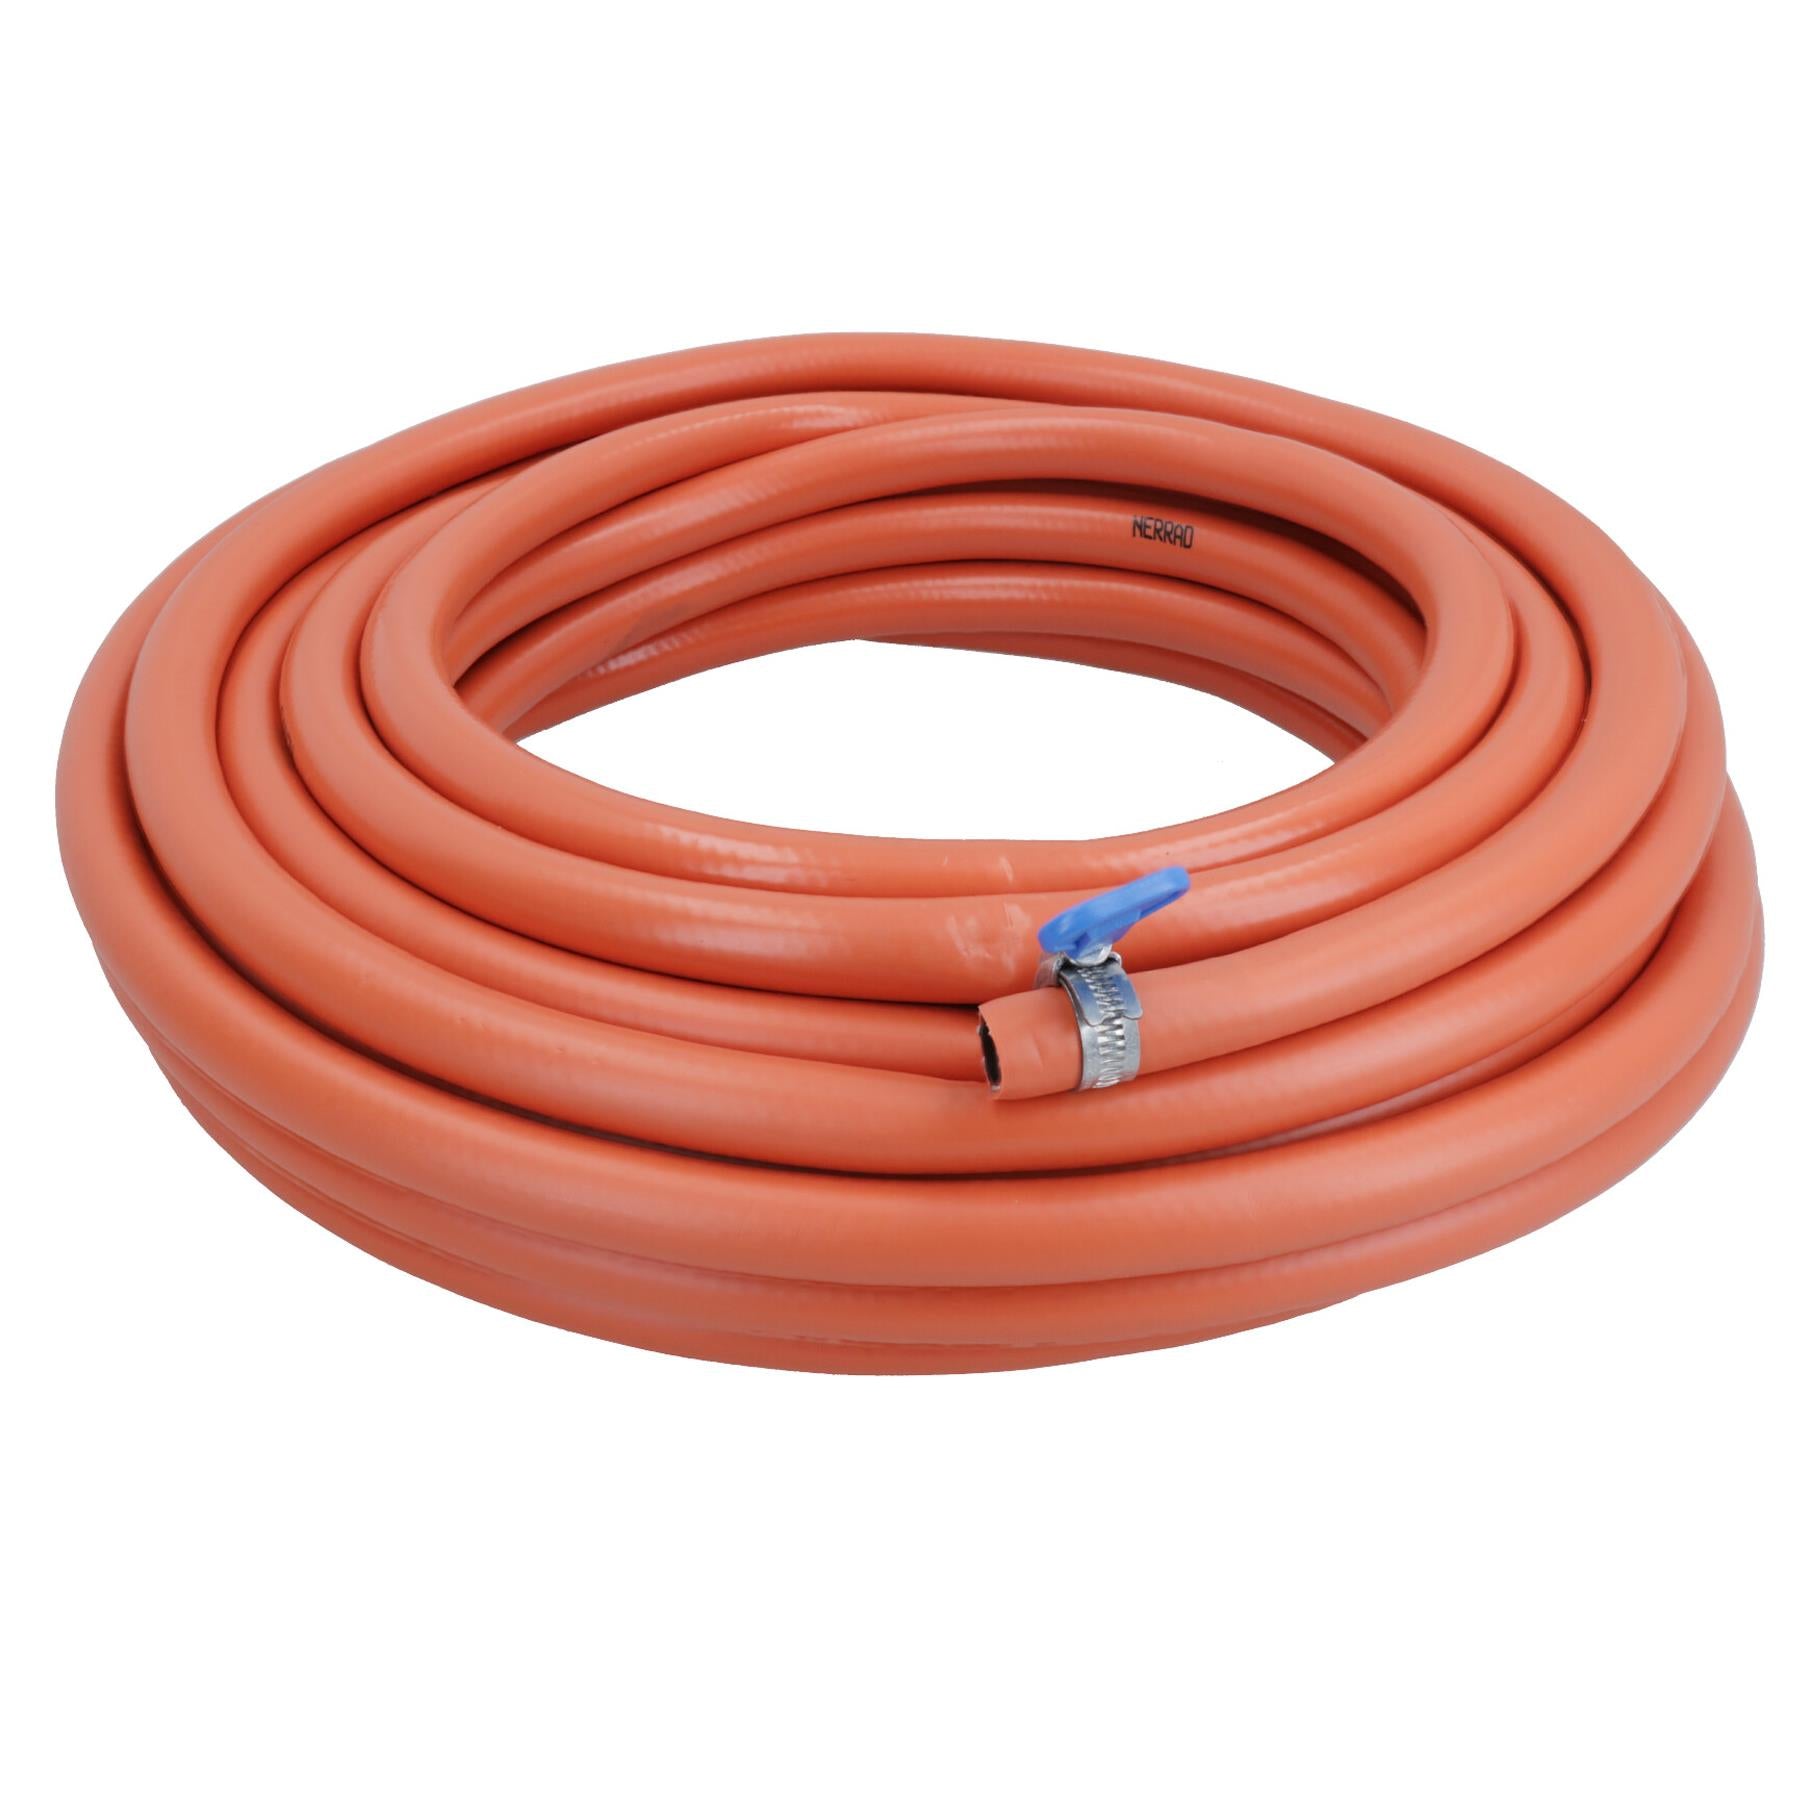 Drain down PVC Rubber Hose 15 Metres No Kink with Hose Clip Plumbing